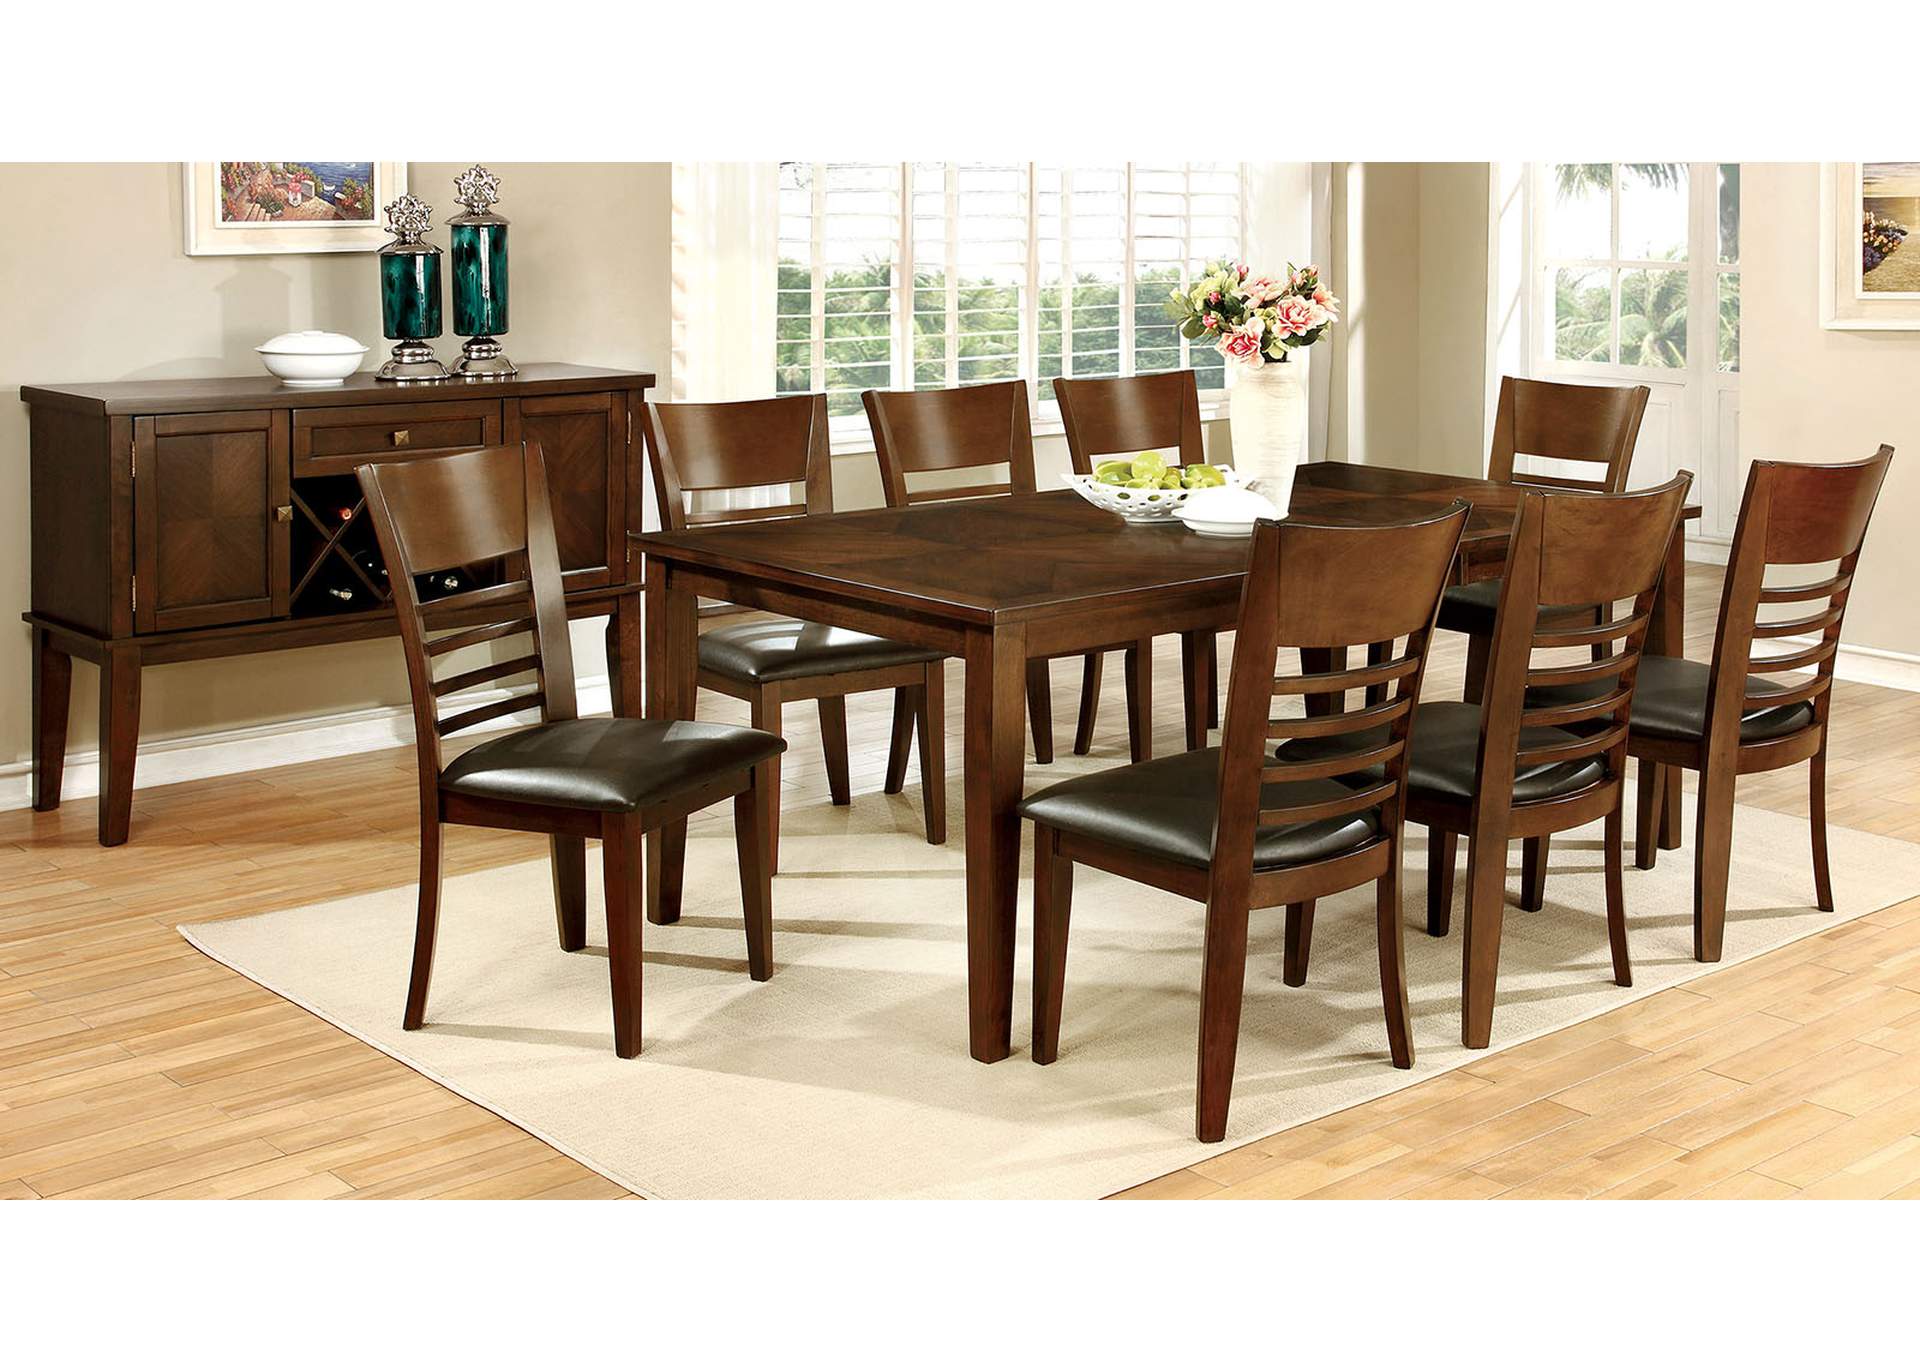 Hillsview I Brown 78" Extension Leaf Dining Table w/8 Side Chair,Furniture of America